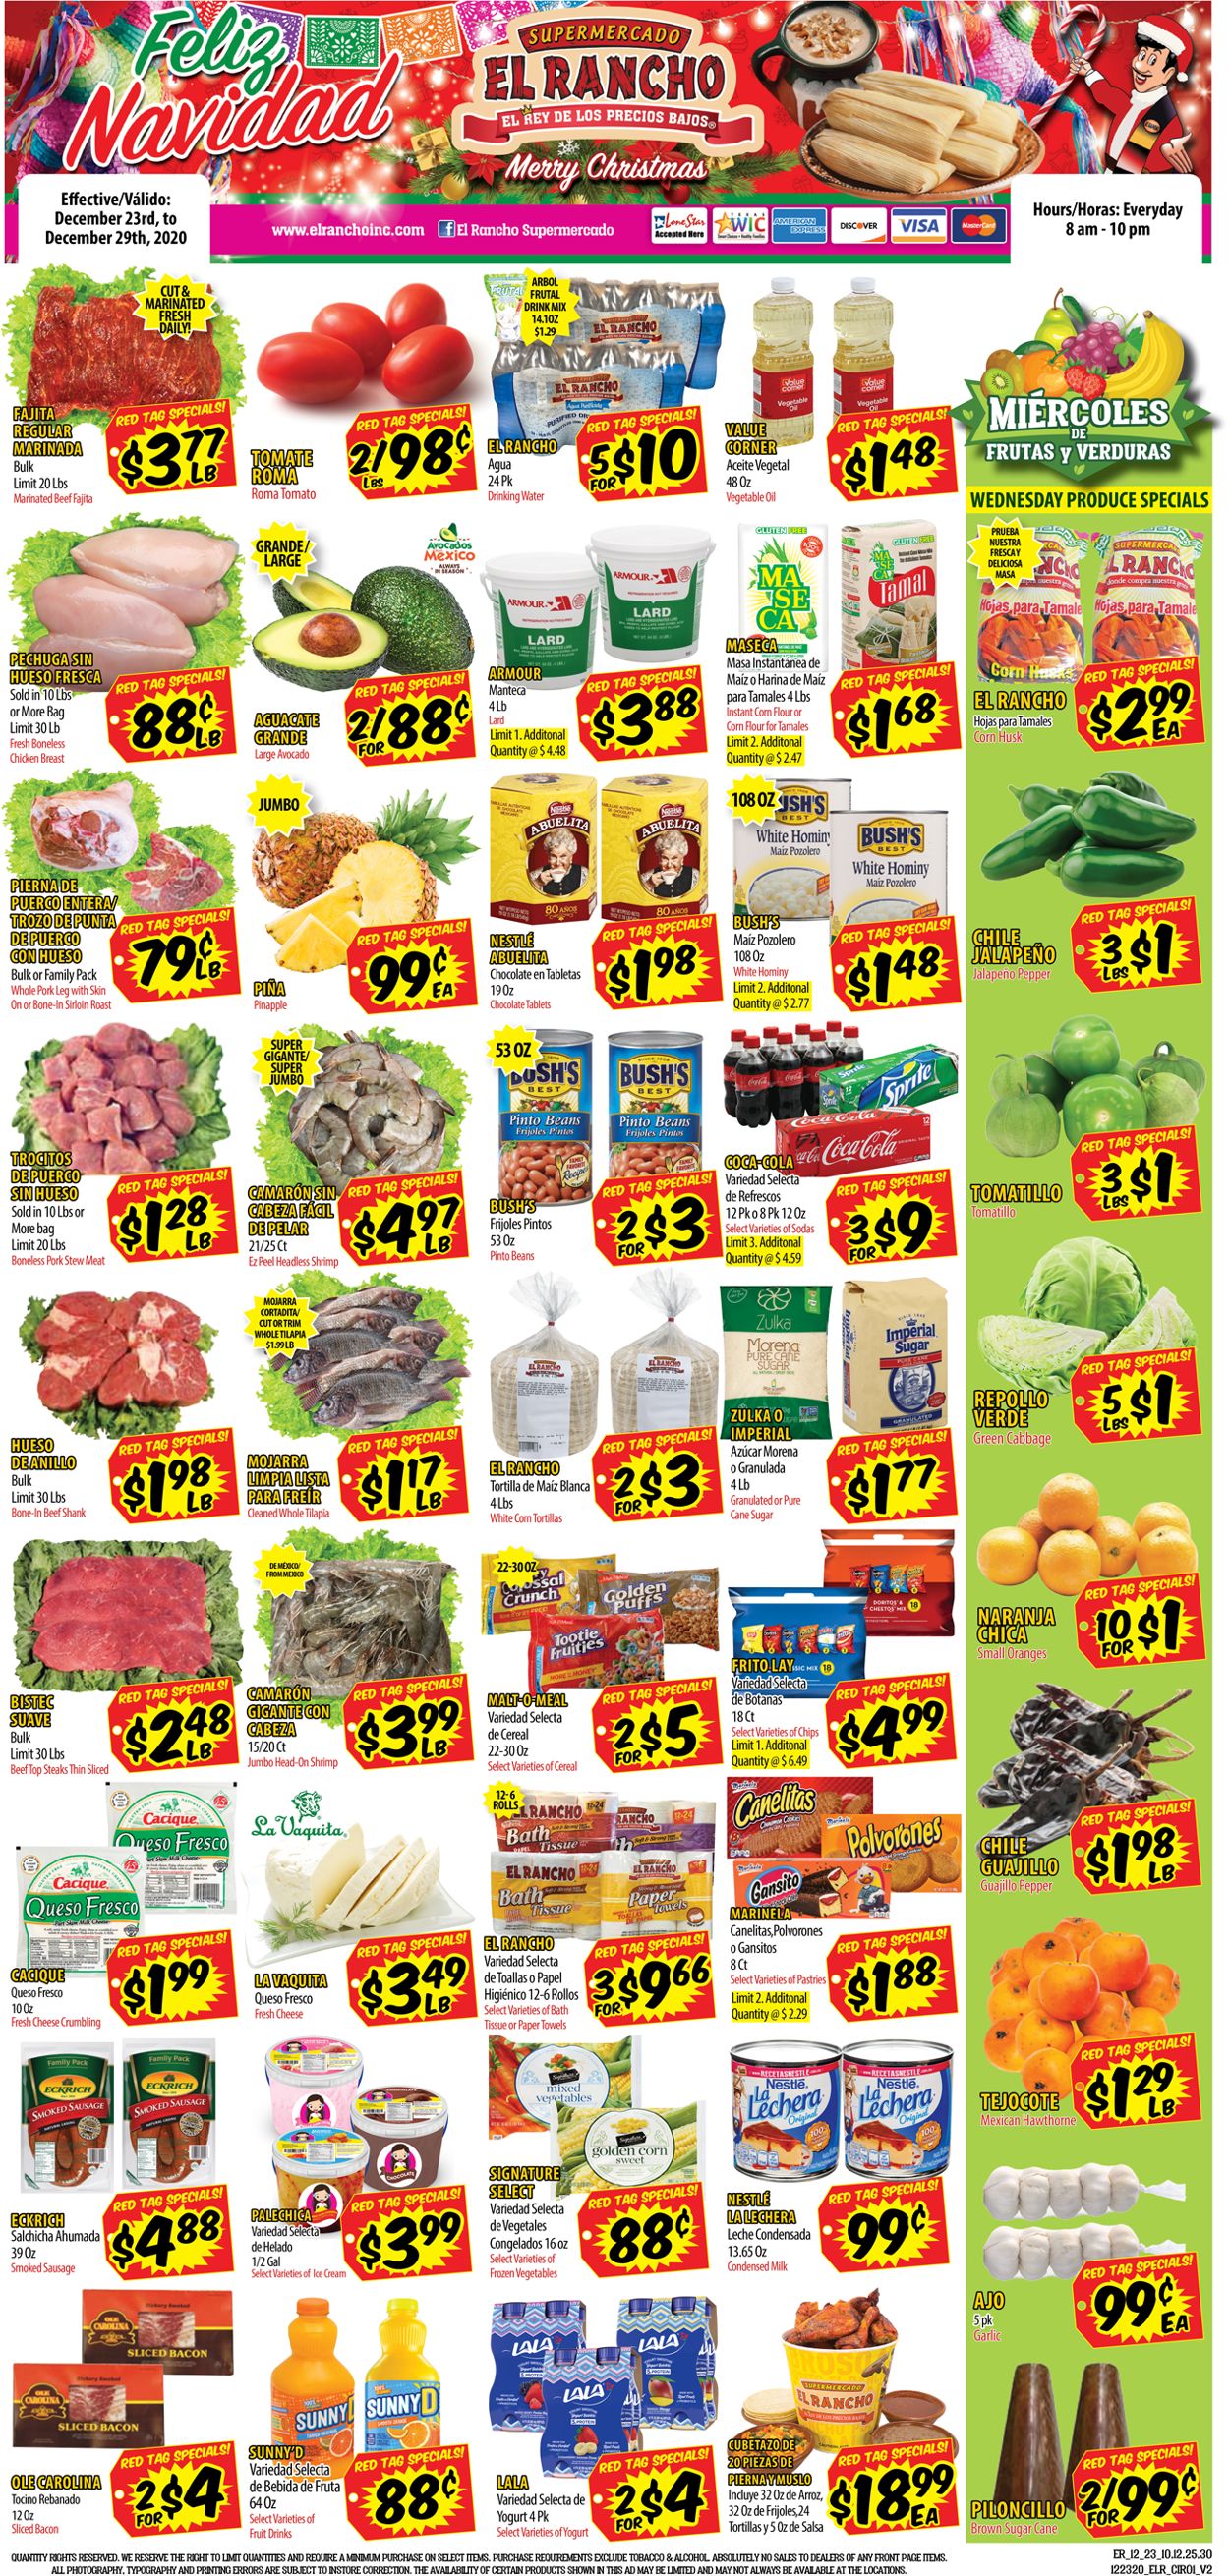 El Rancho Current weekly ad 12/23 - 12/29/2020 - frequent-ads.com